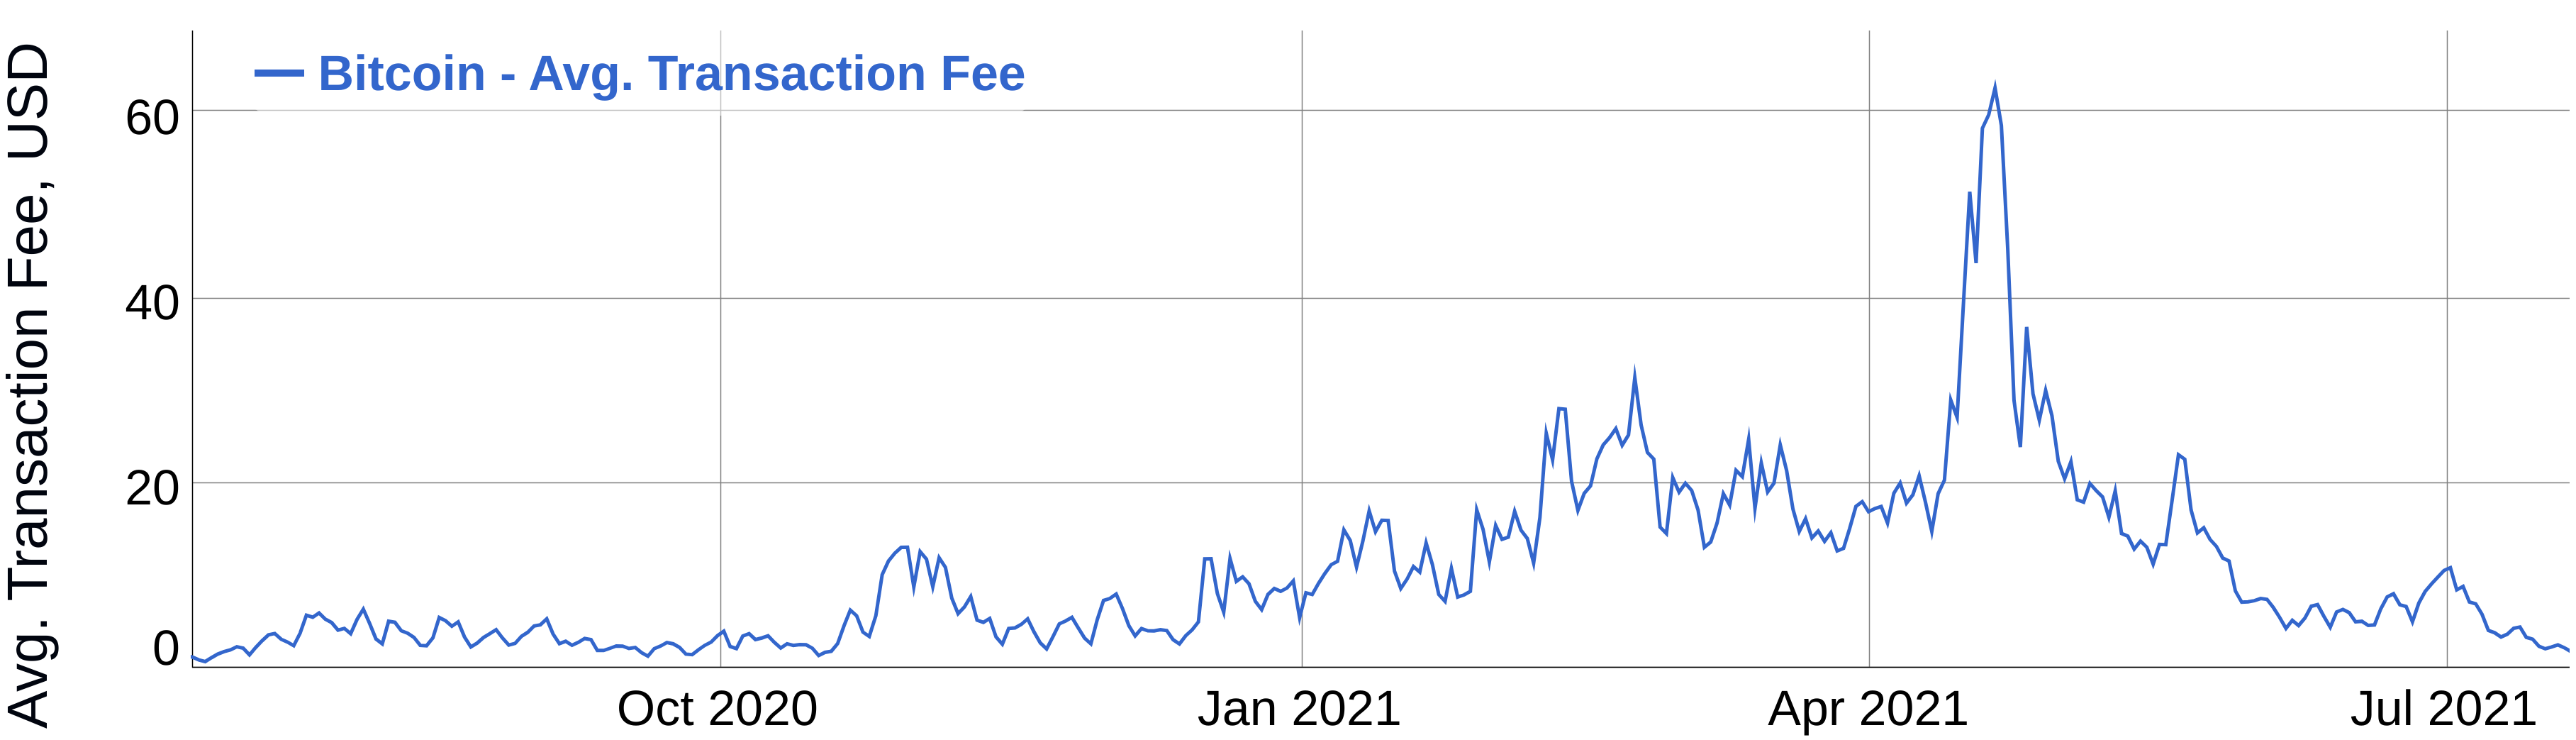 Chart of Bitcoin fees over time